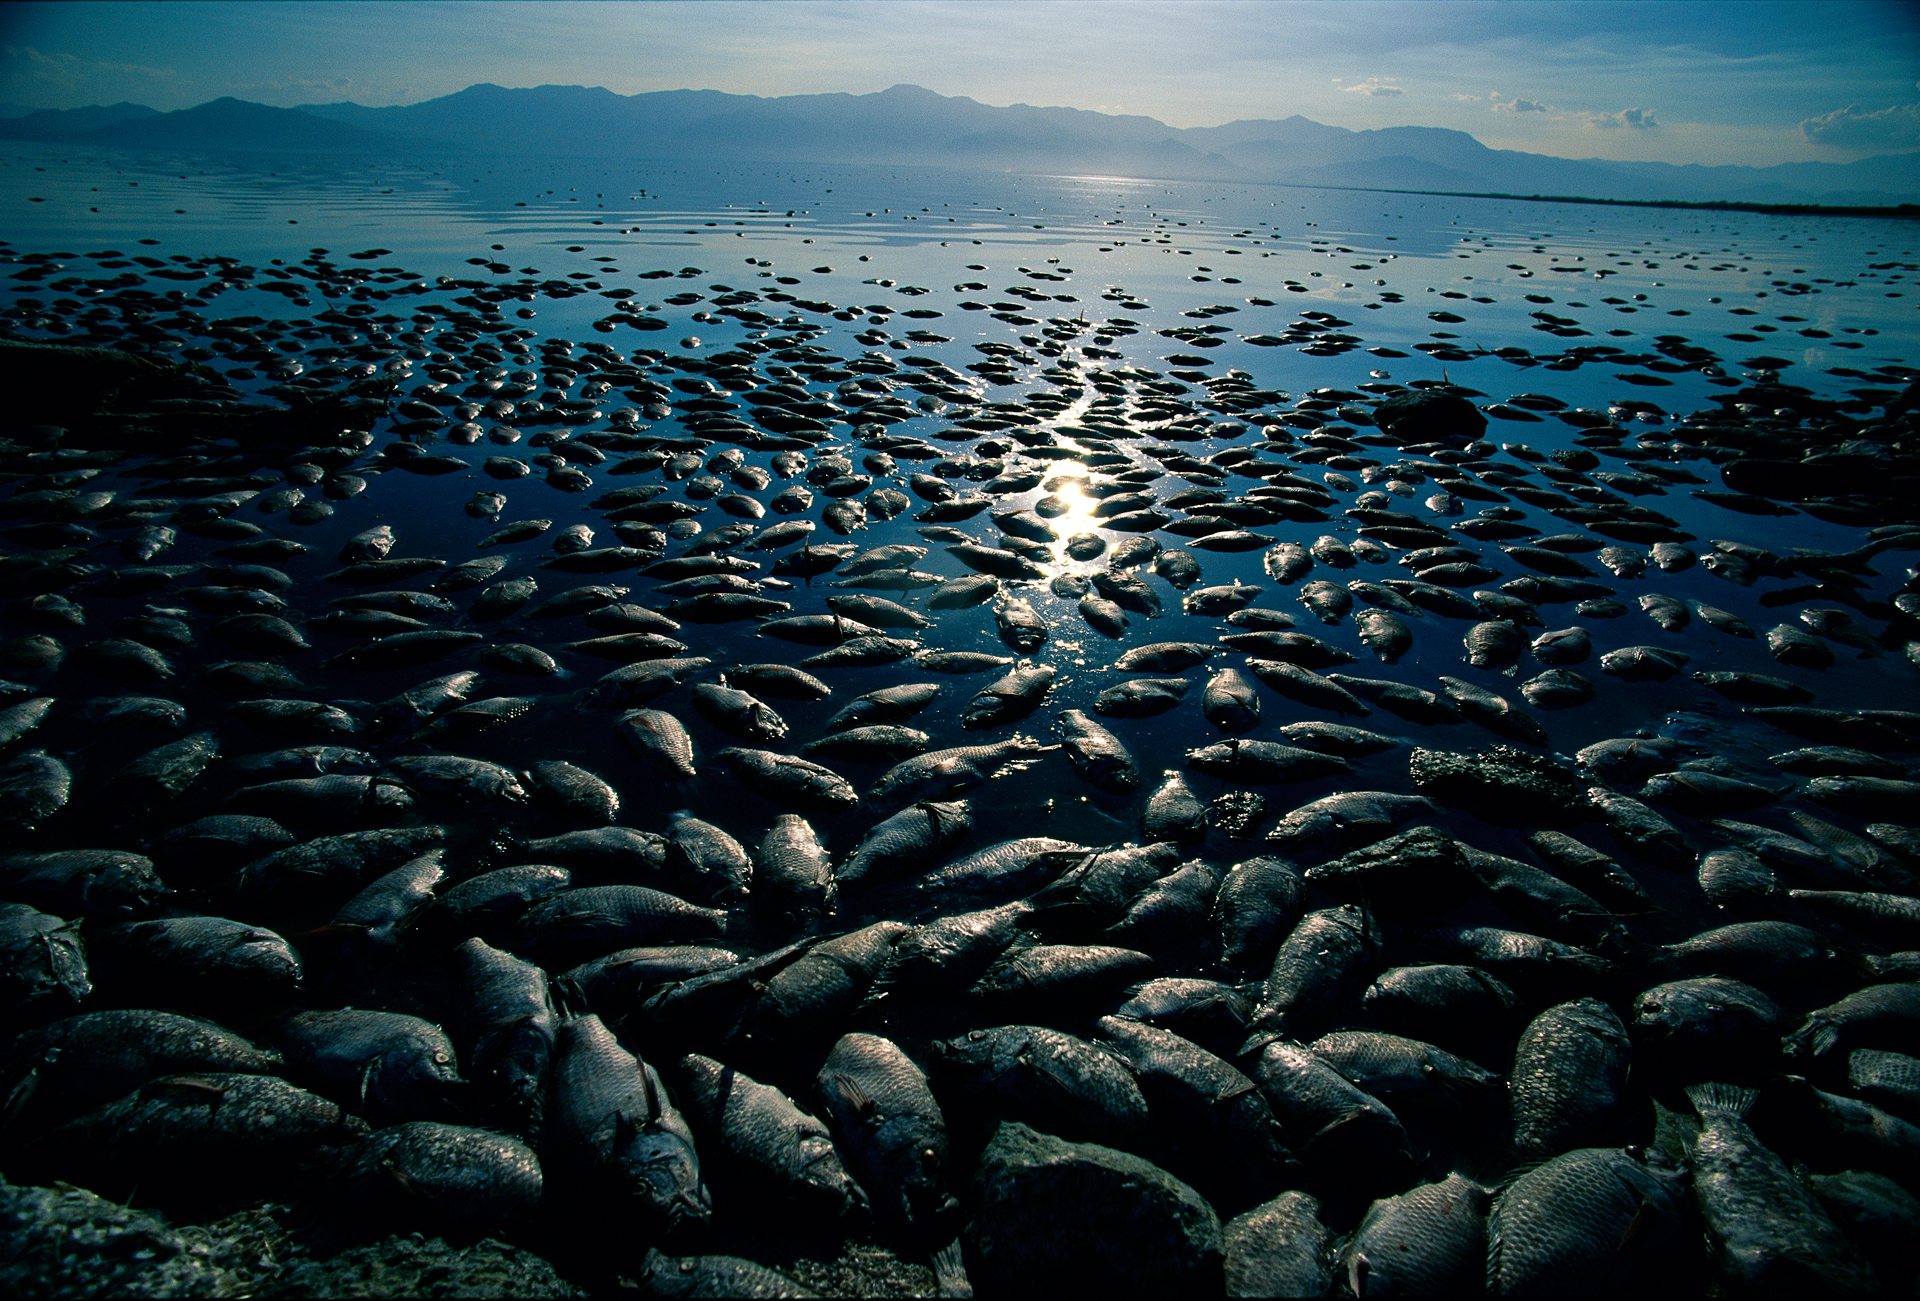  Massive fish die-offs struck the Salton Sea in the late 1990’s, with an estimate of nearly 8 million tilapia dying on a single hot day in August 1999.  Northshore  